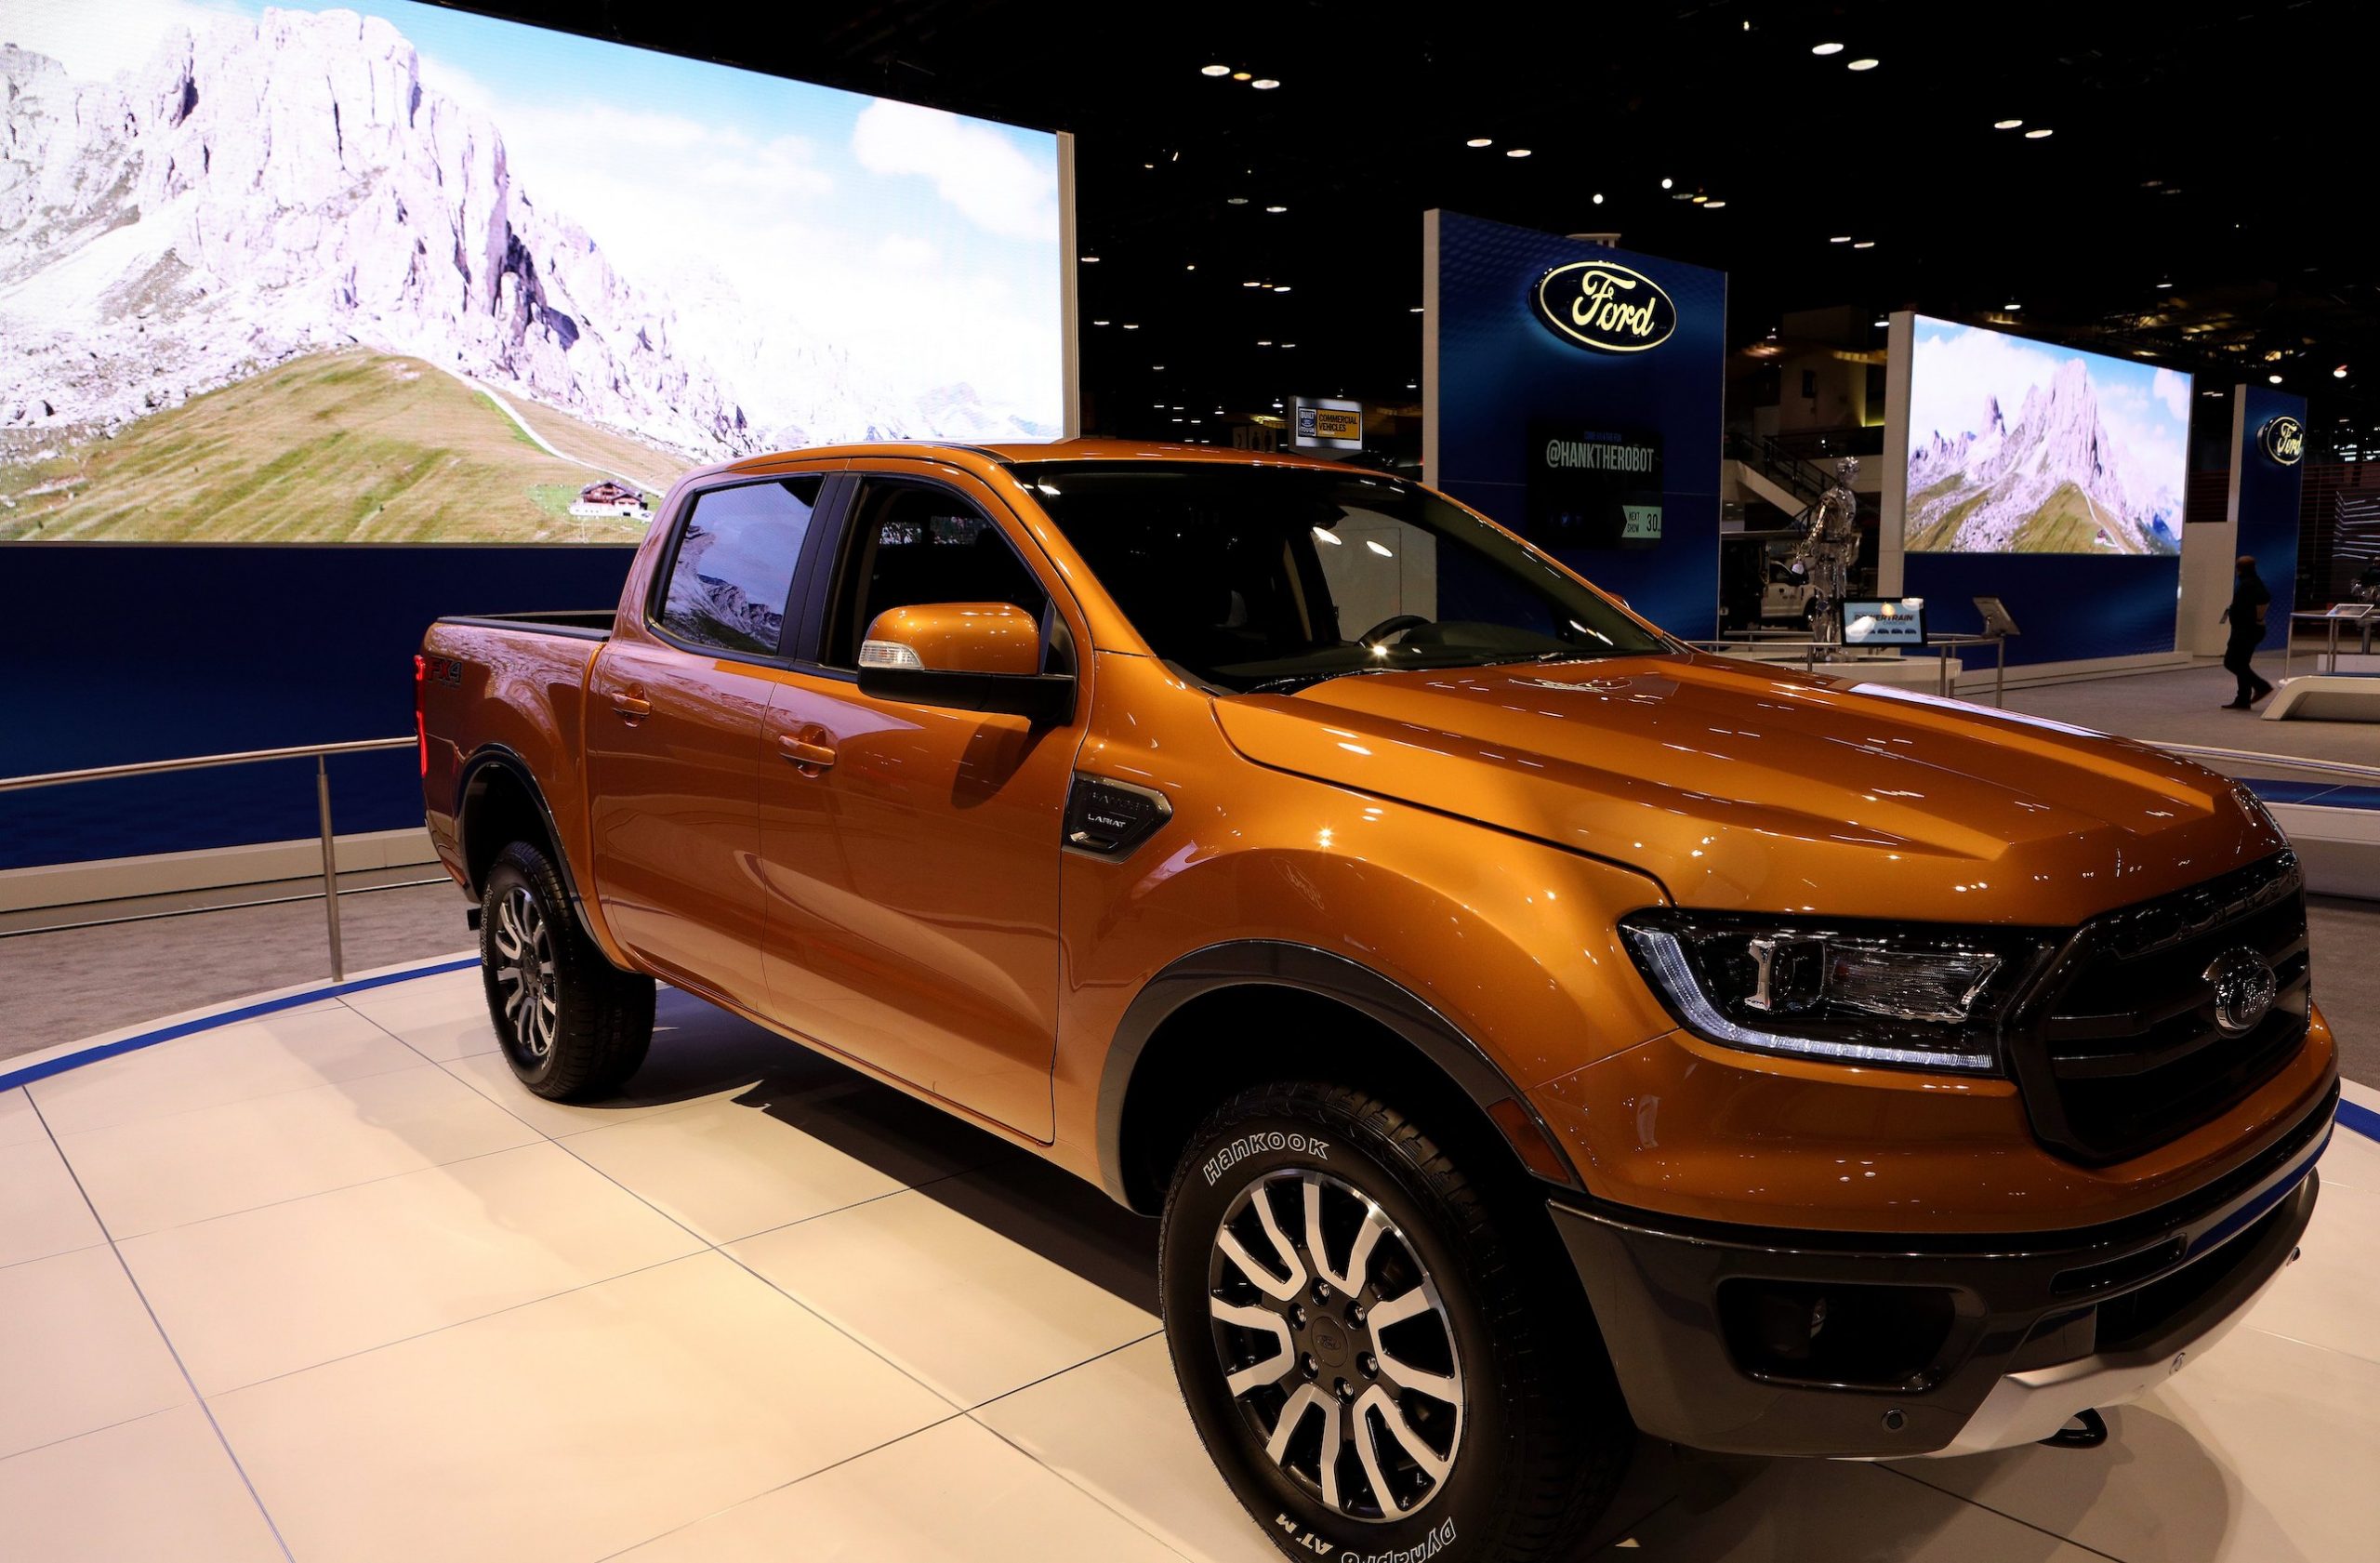 2019 Ford Ranger is on display at the 110th Annual Chicago Auto Show